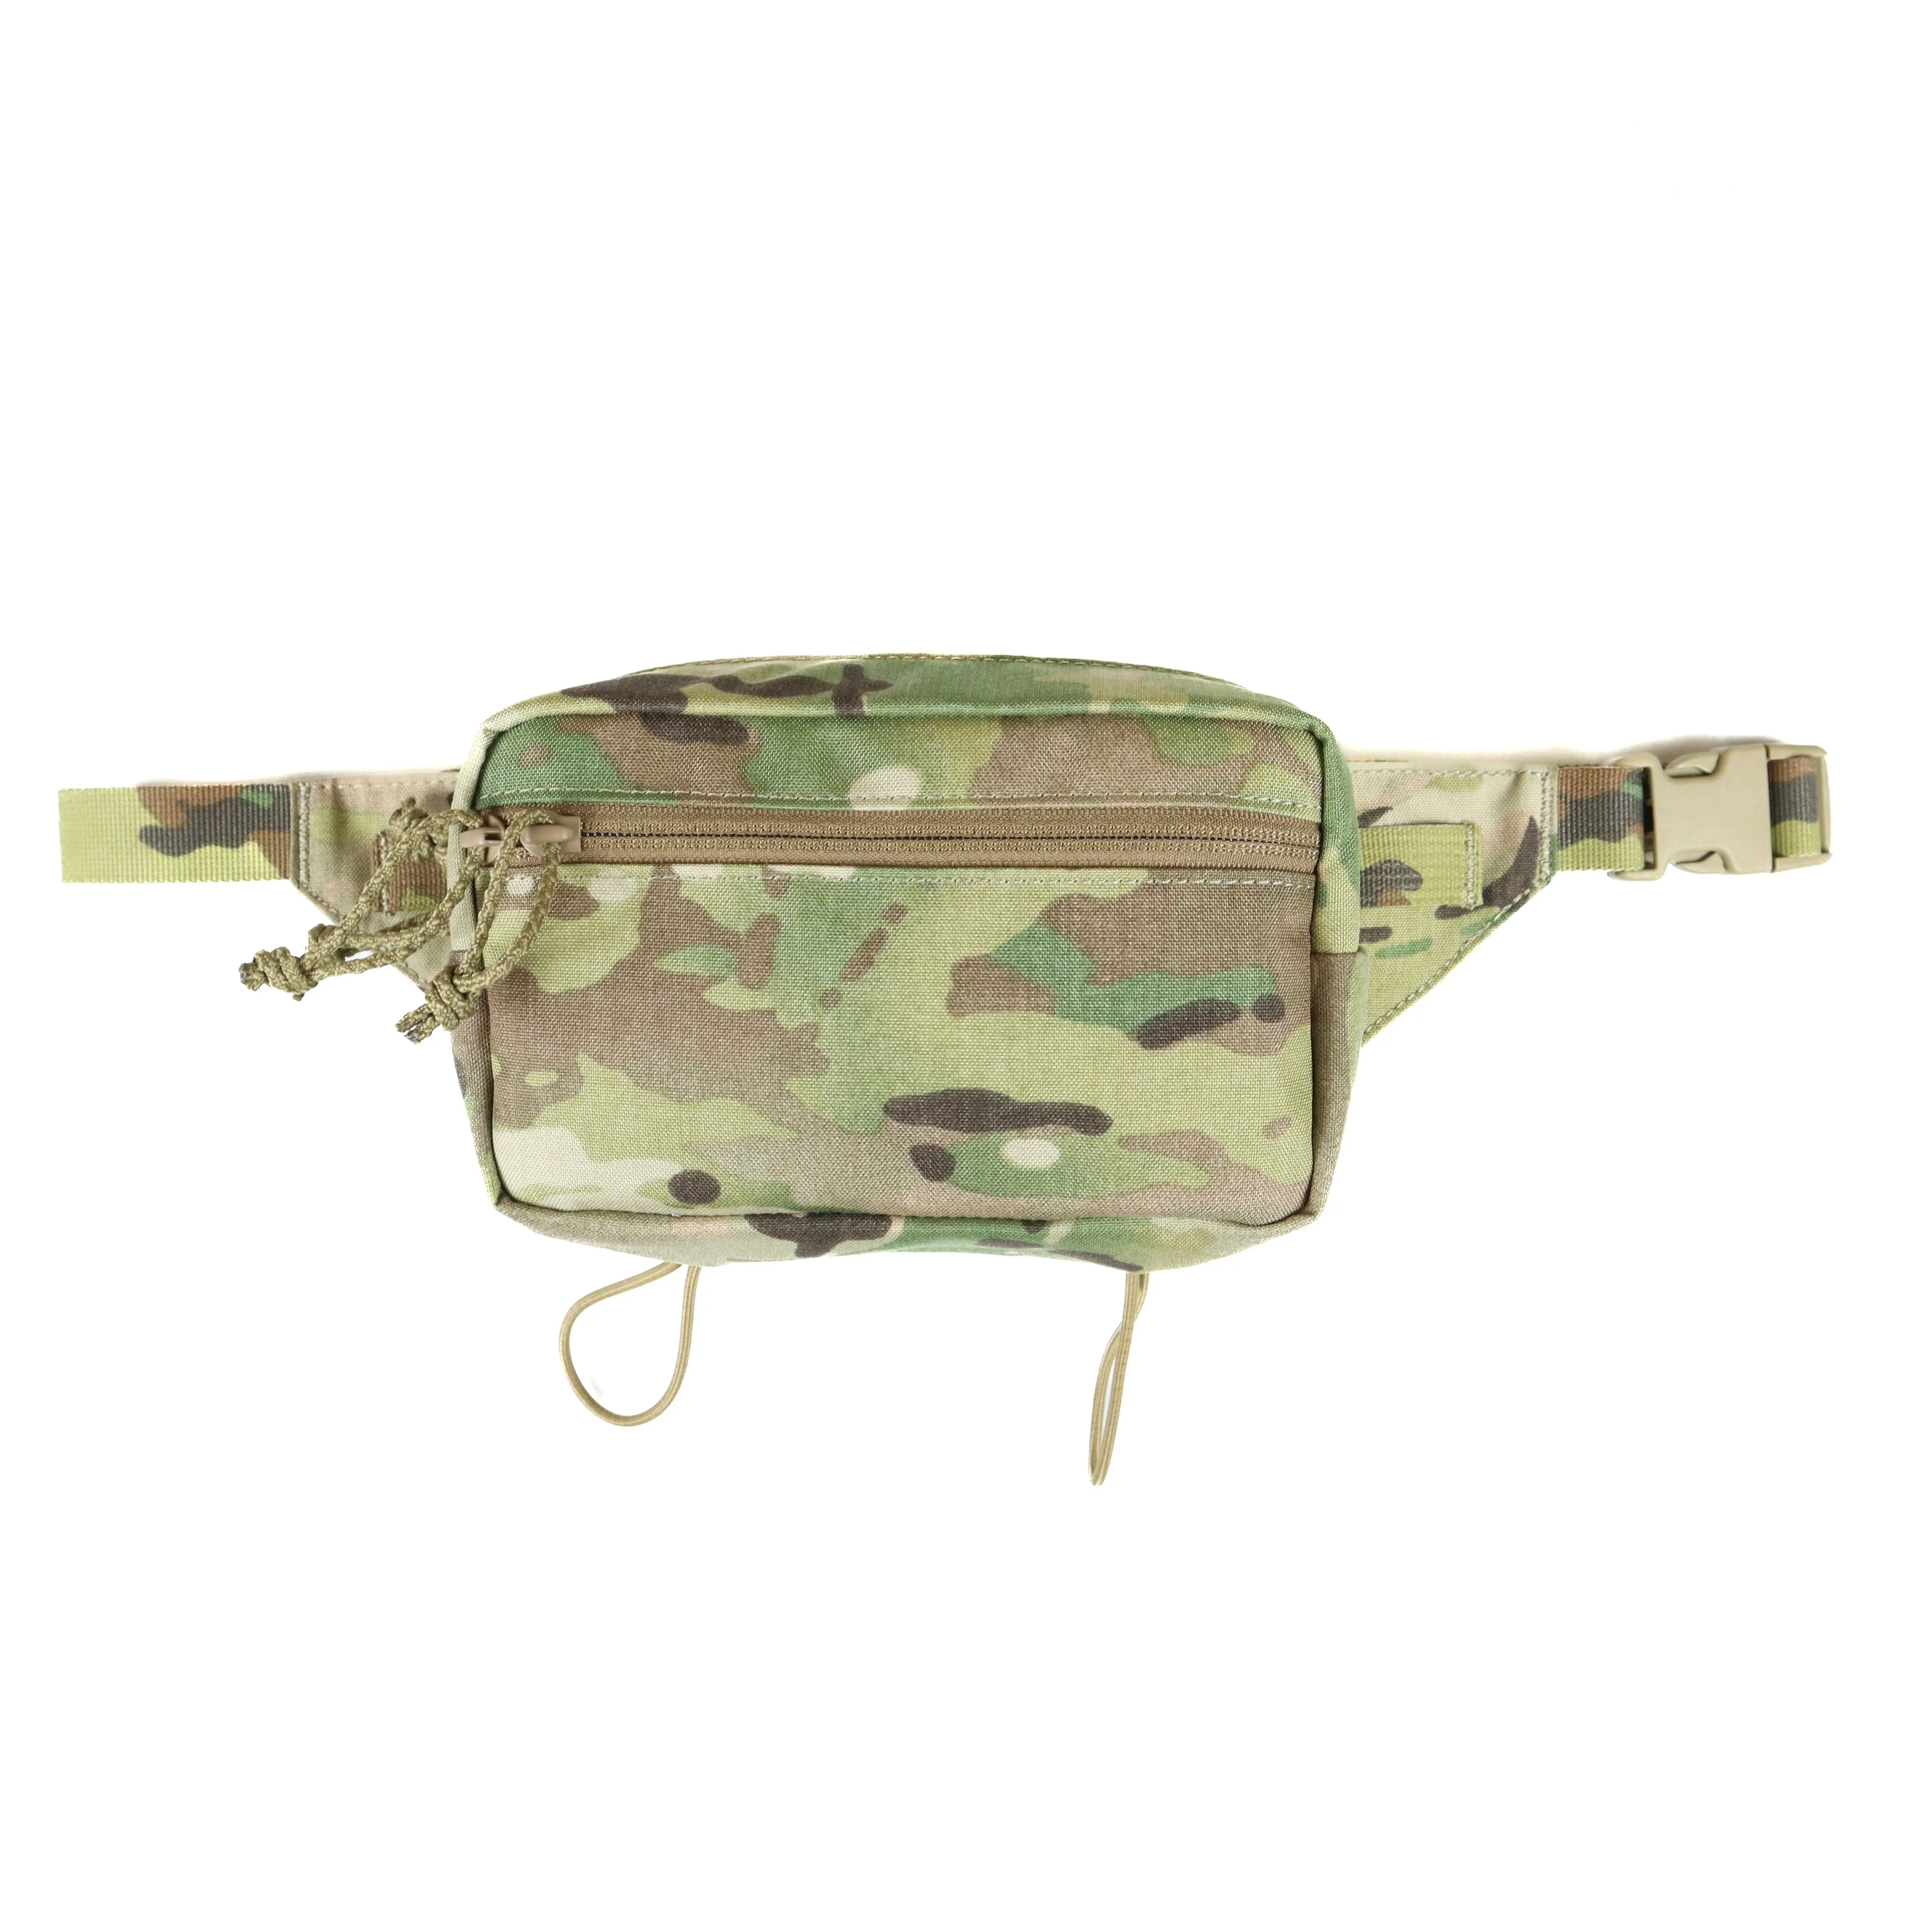 TW-P150 Twinfalcons Waist Bag Fanny Sack AOR1 Multicam Camo Spiritus Systems SS Wargame Fashion Tactical Pack